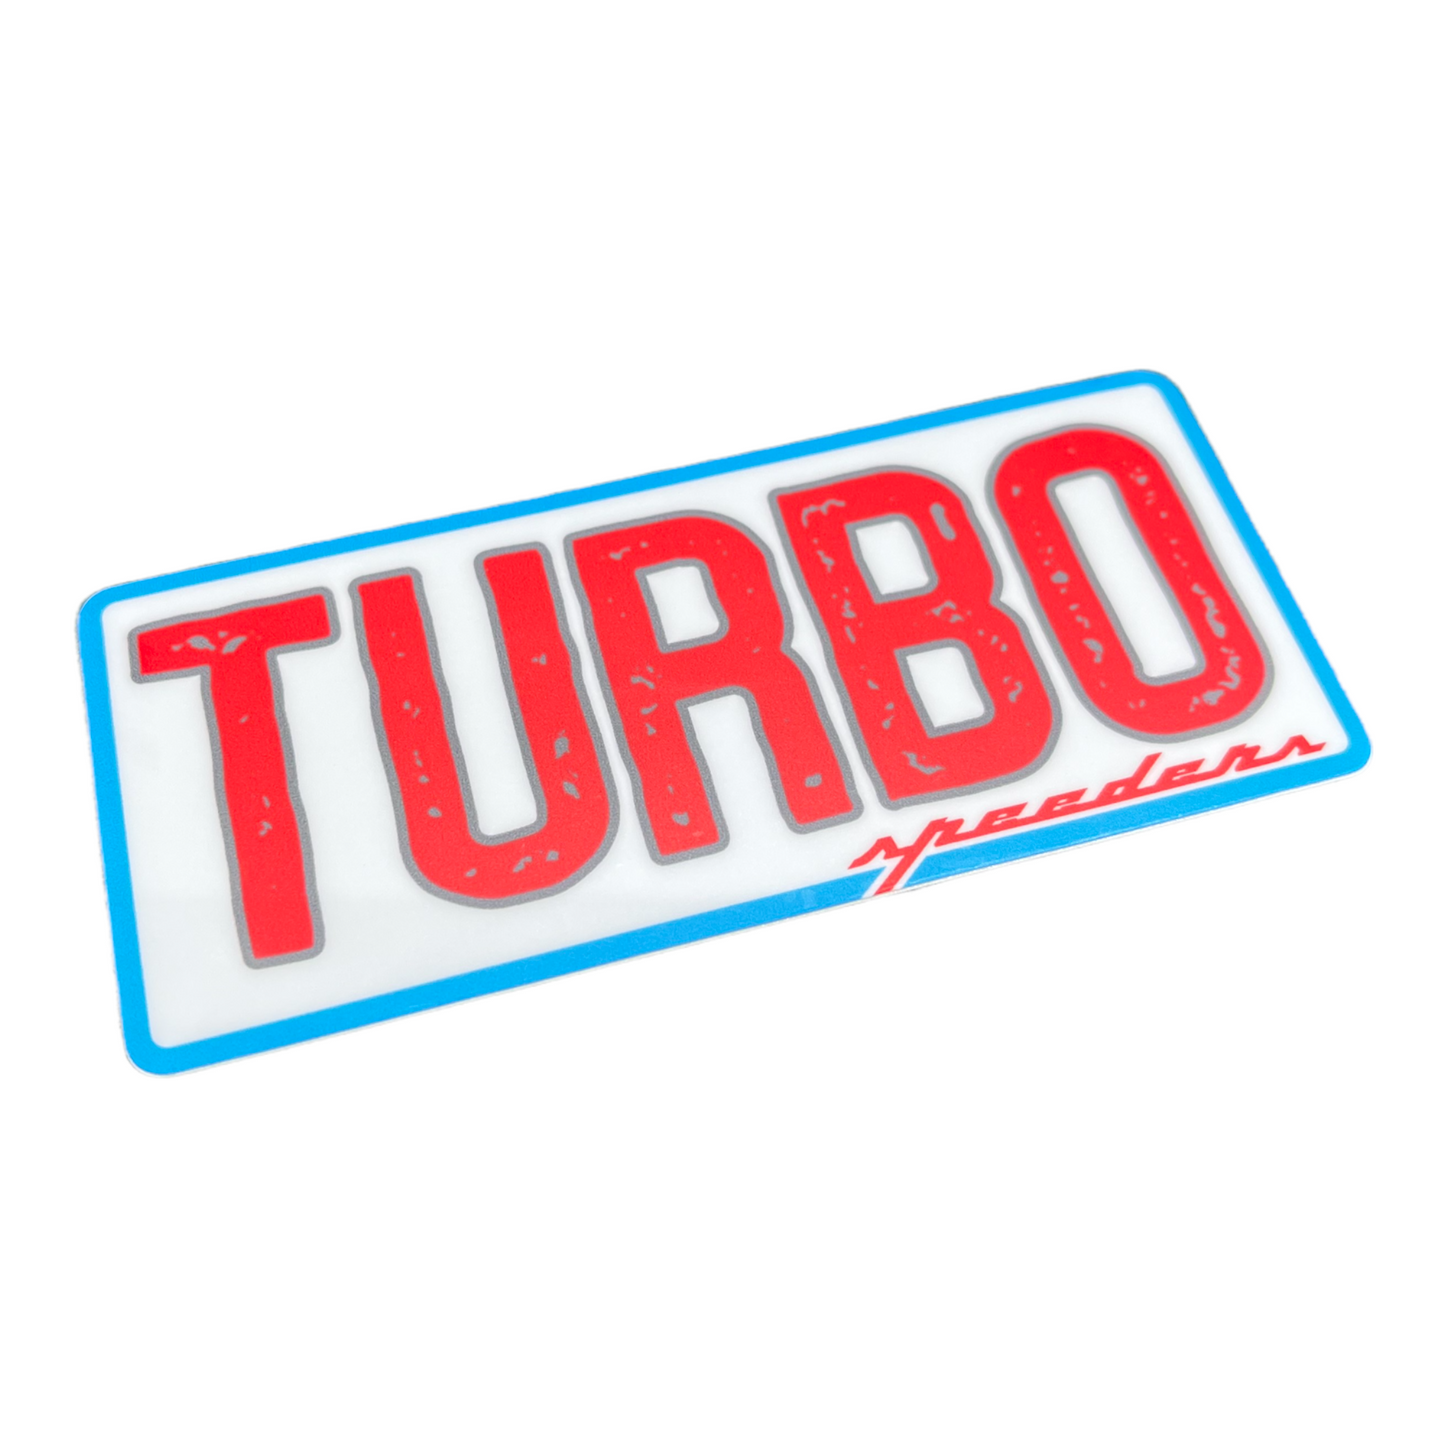 "Turbo" Automotive Sticker (Red, White, and Blue)